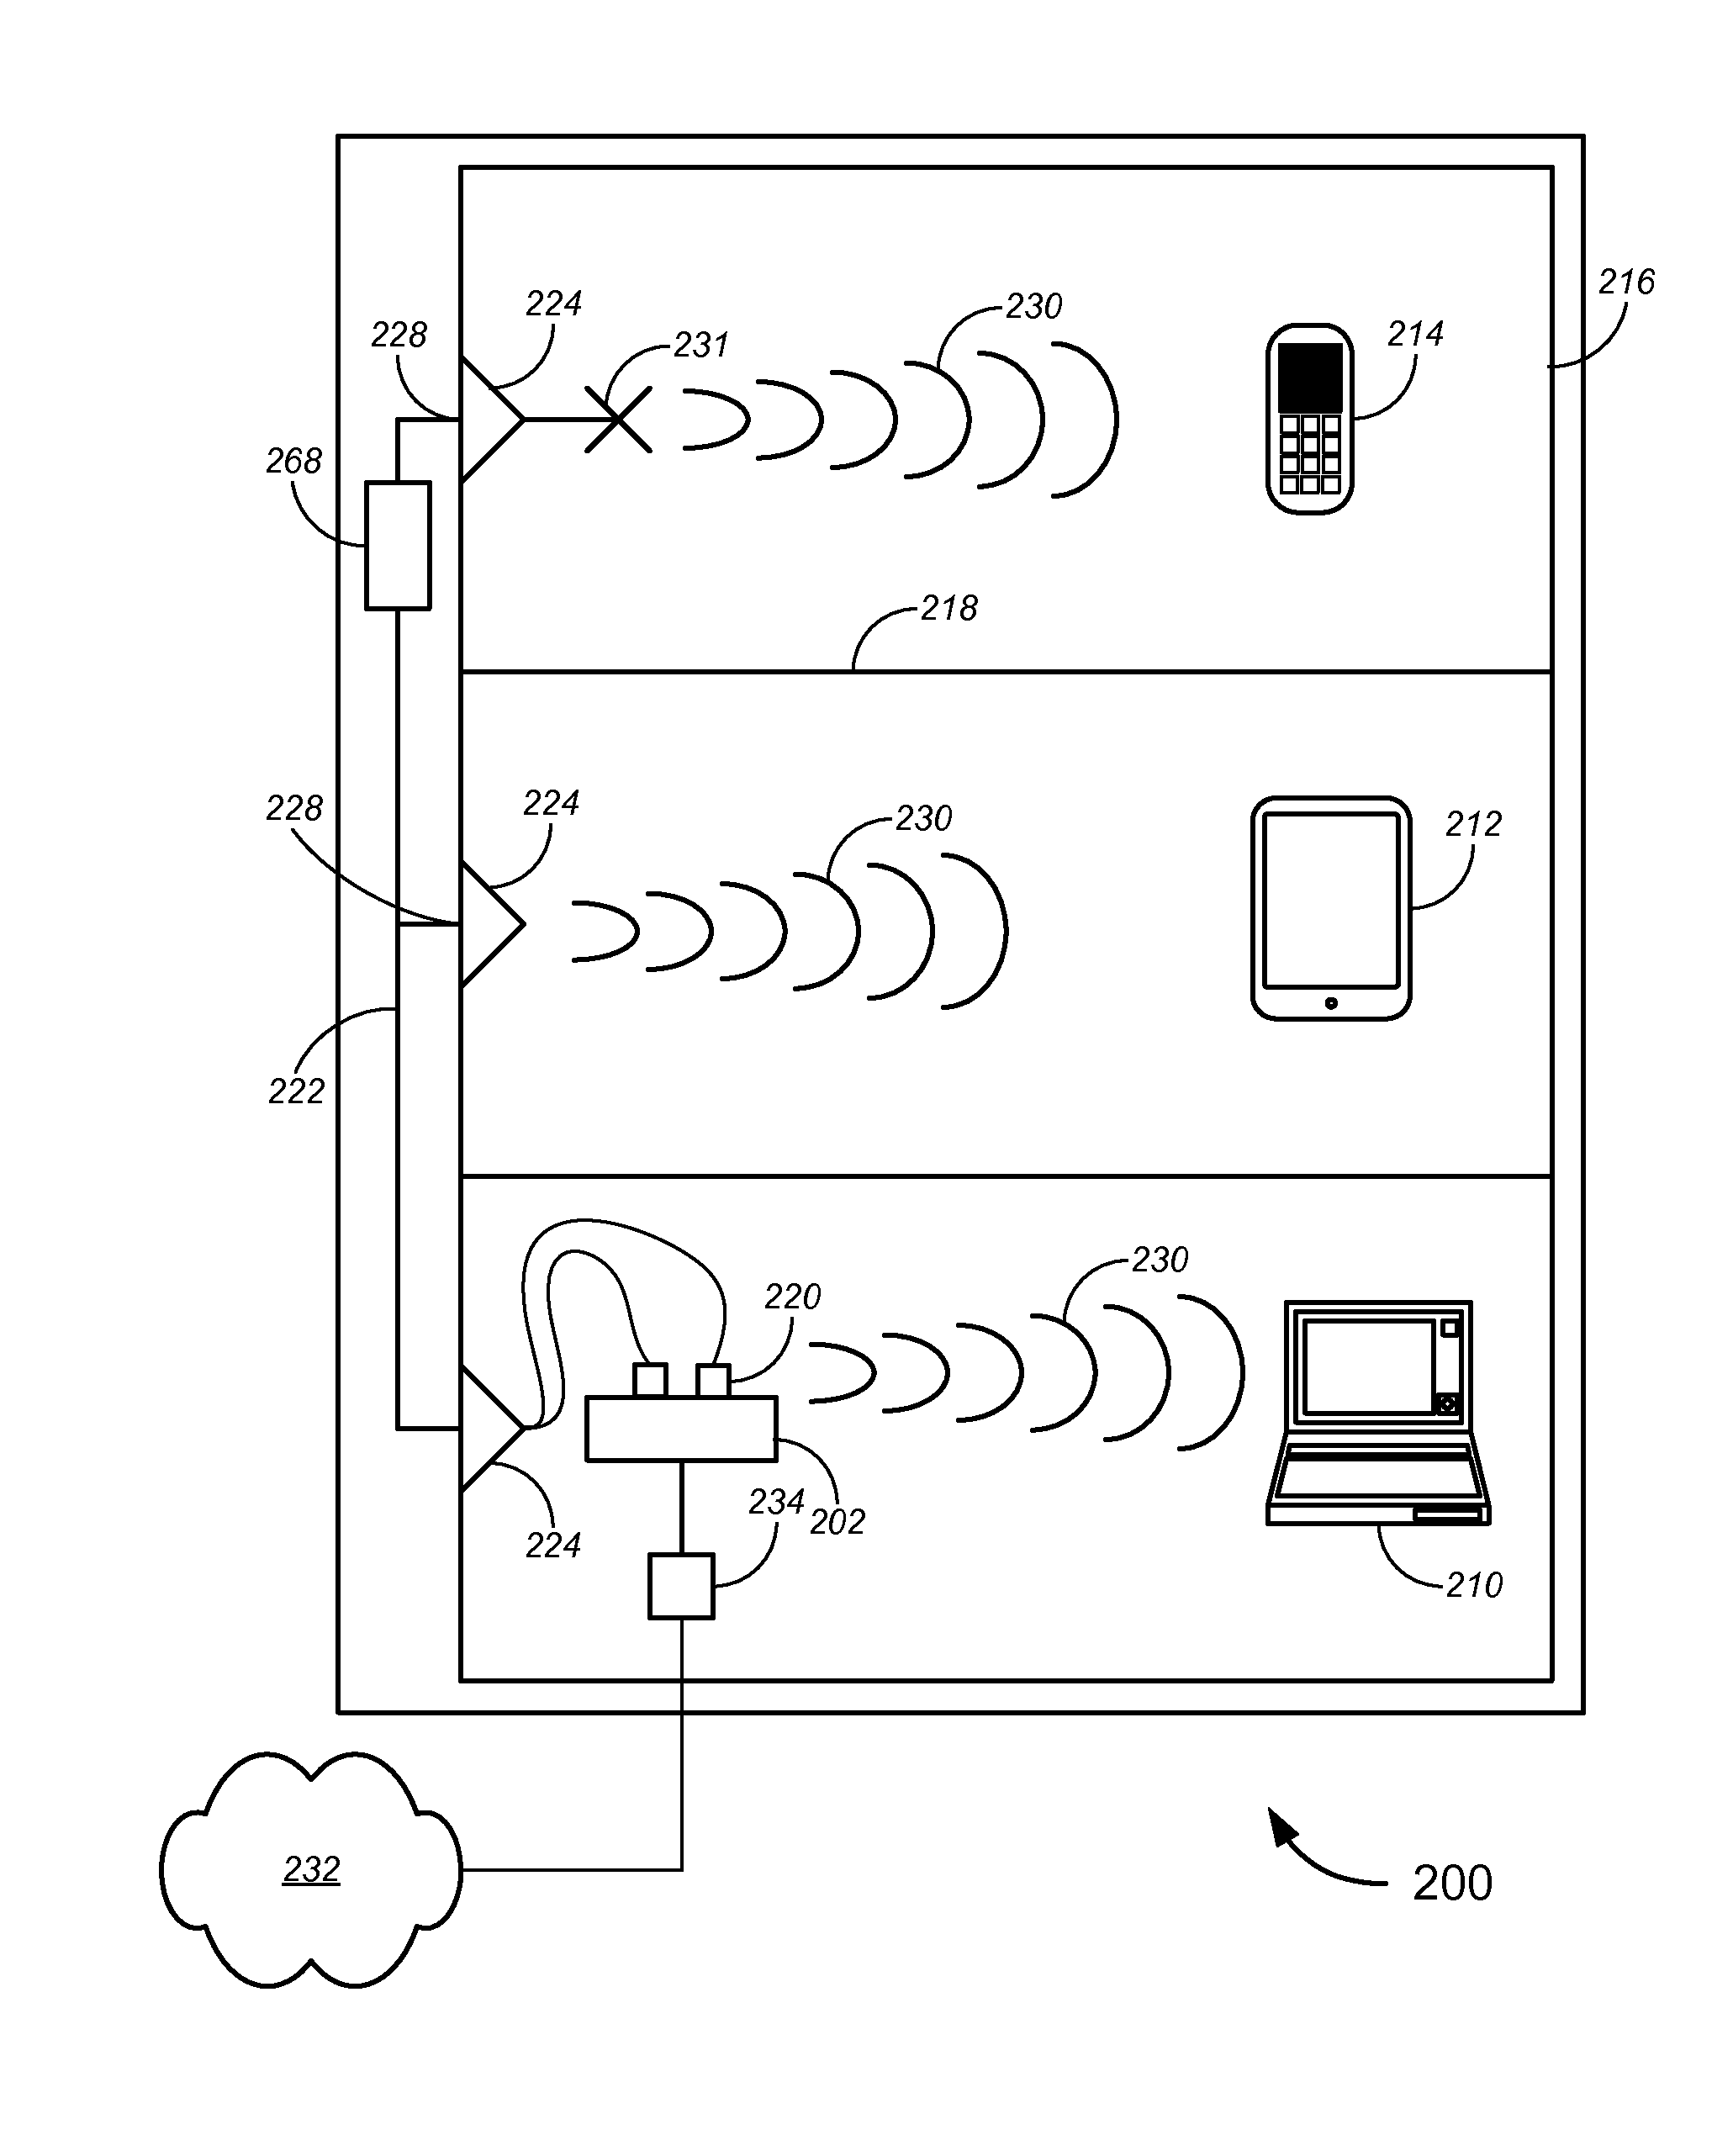 Enhanced wireless signal distribution using in-building wiring